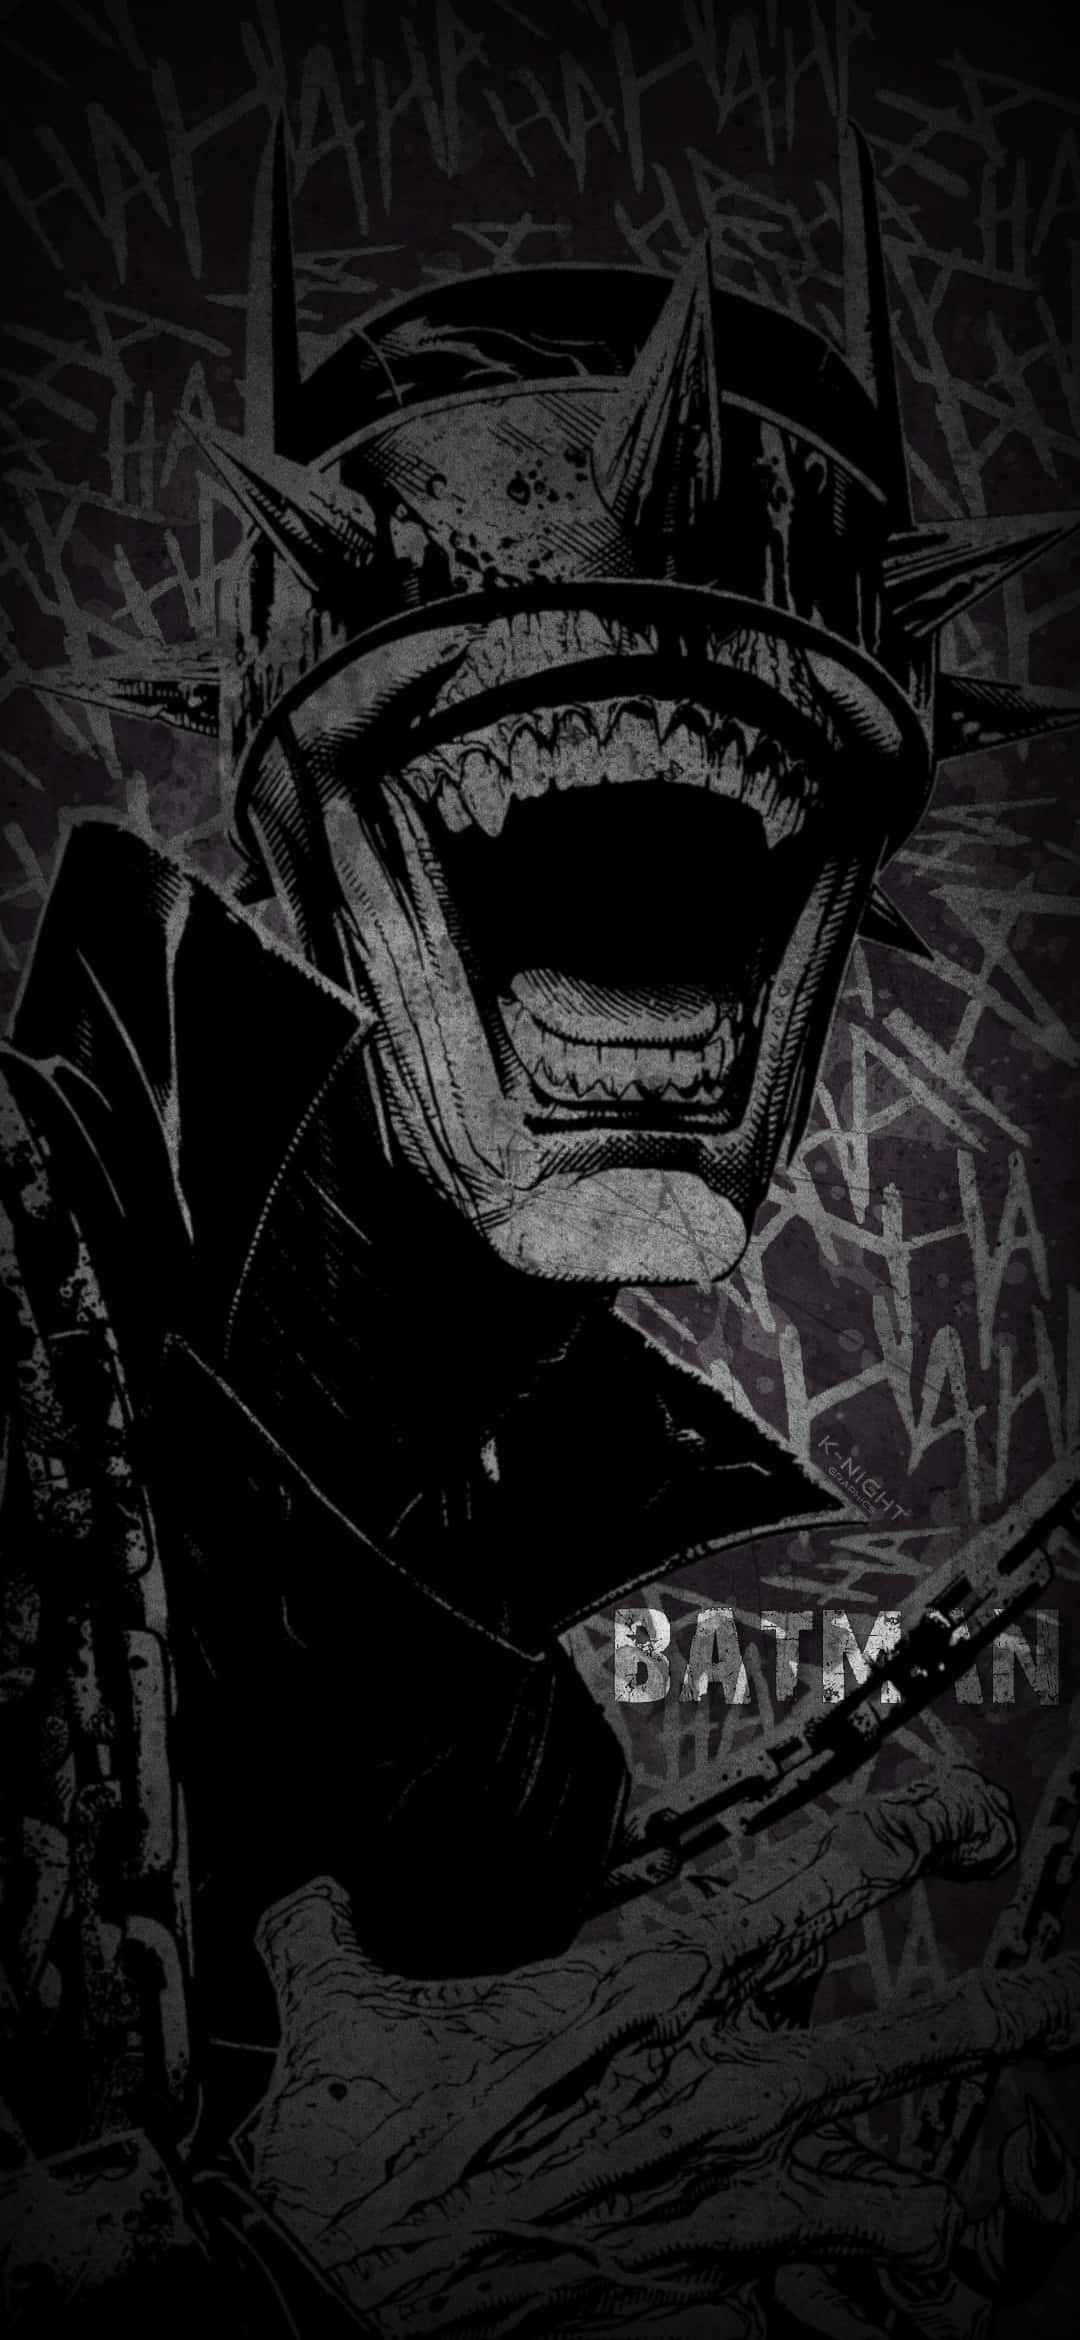 The Batman Who Laughs is here, and only a hero that is both brave and strong can stop him Wallpaper